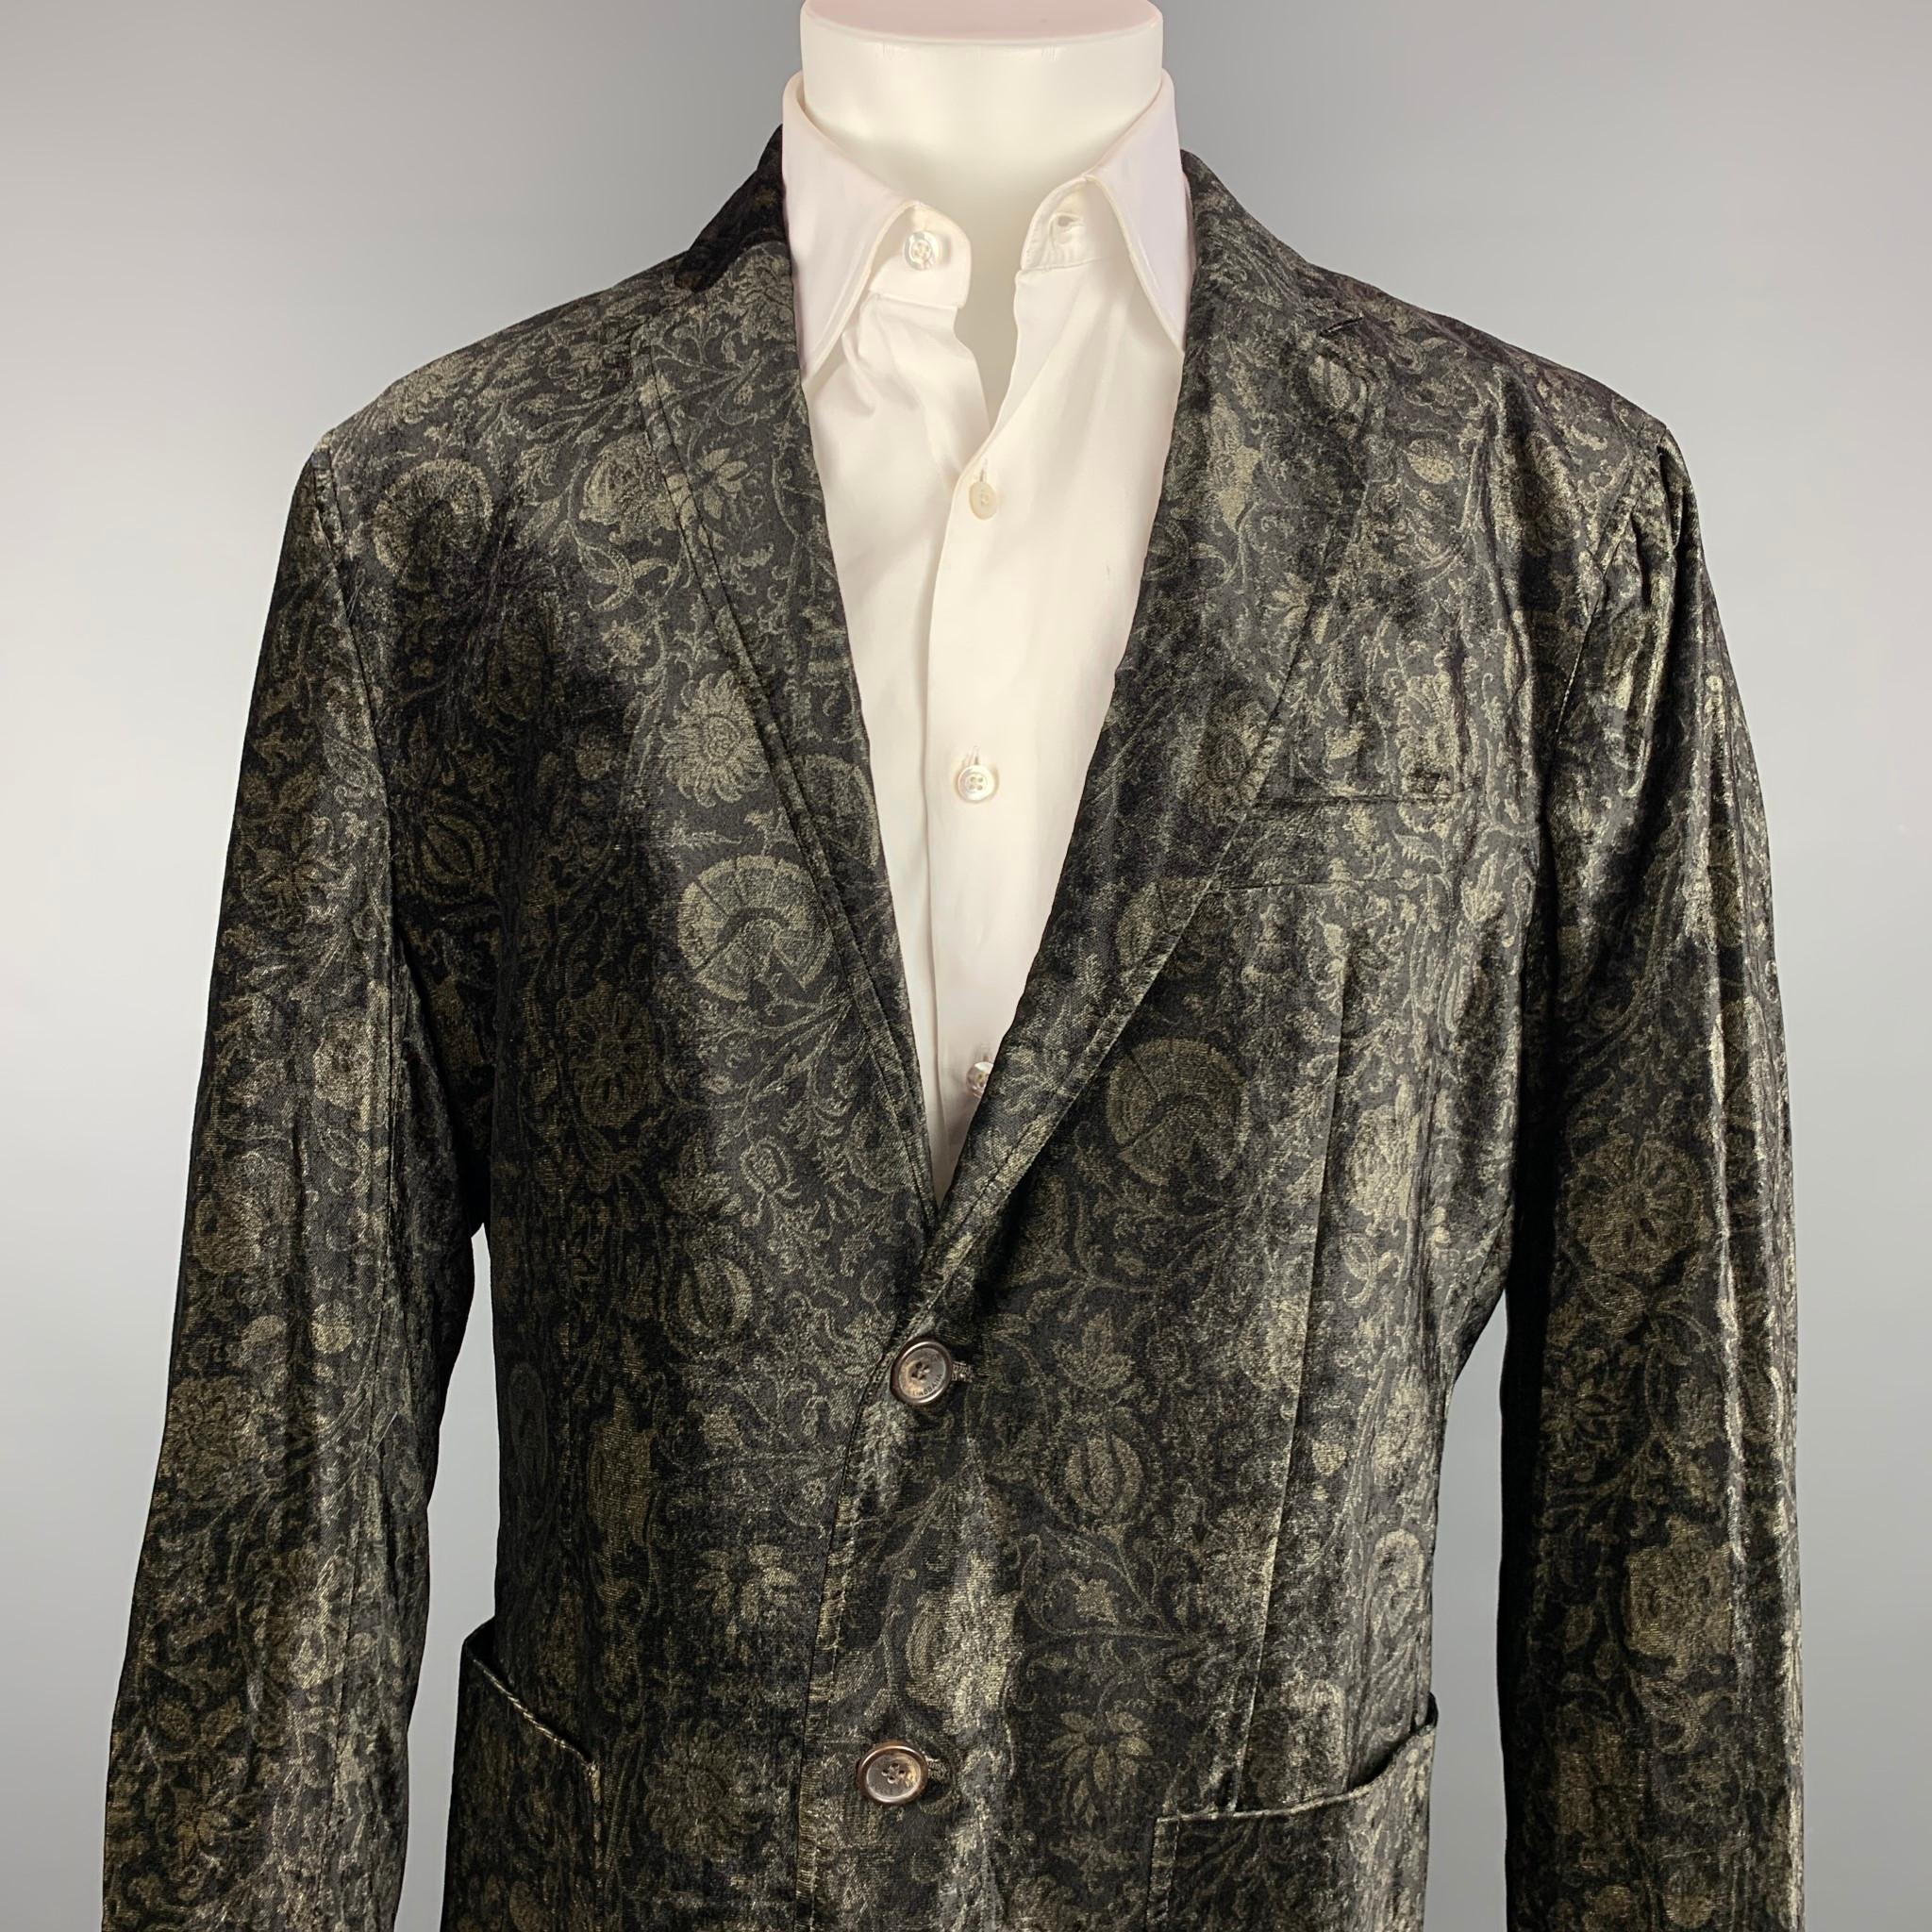 D&G by DOLCE & GABBANA sport coat comes in a black & gold velvet with a full monogram liner featuring a notch lapel, patch pockets, and a two button closure.

Good Pre-Owned Condition.
Marked: 50

Measurements:

Shoulder: 20 in.
Chest: 44